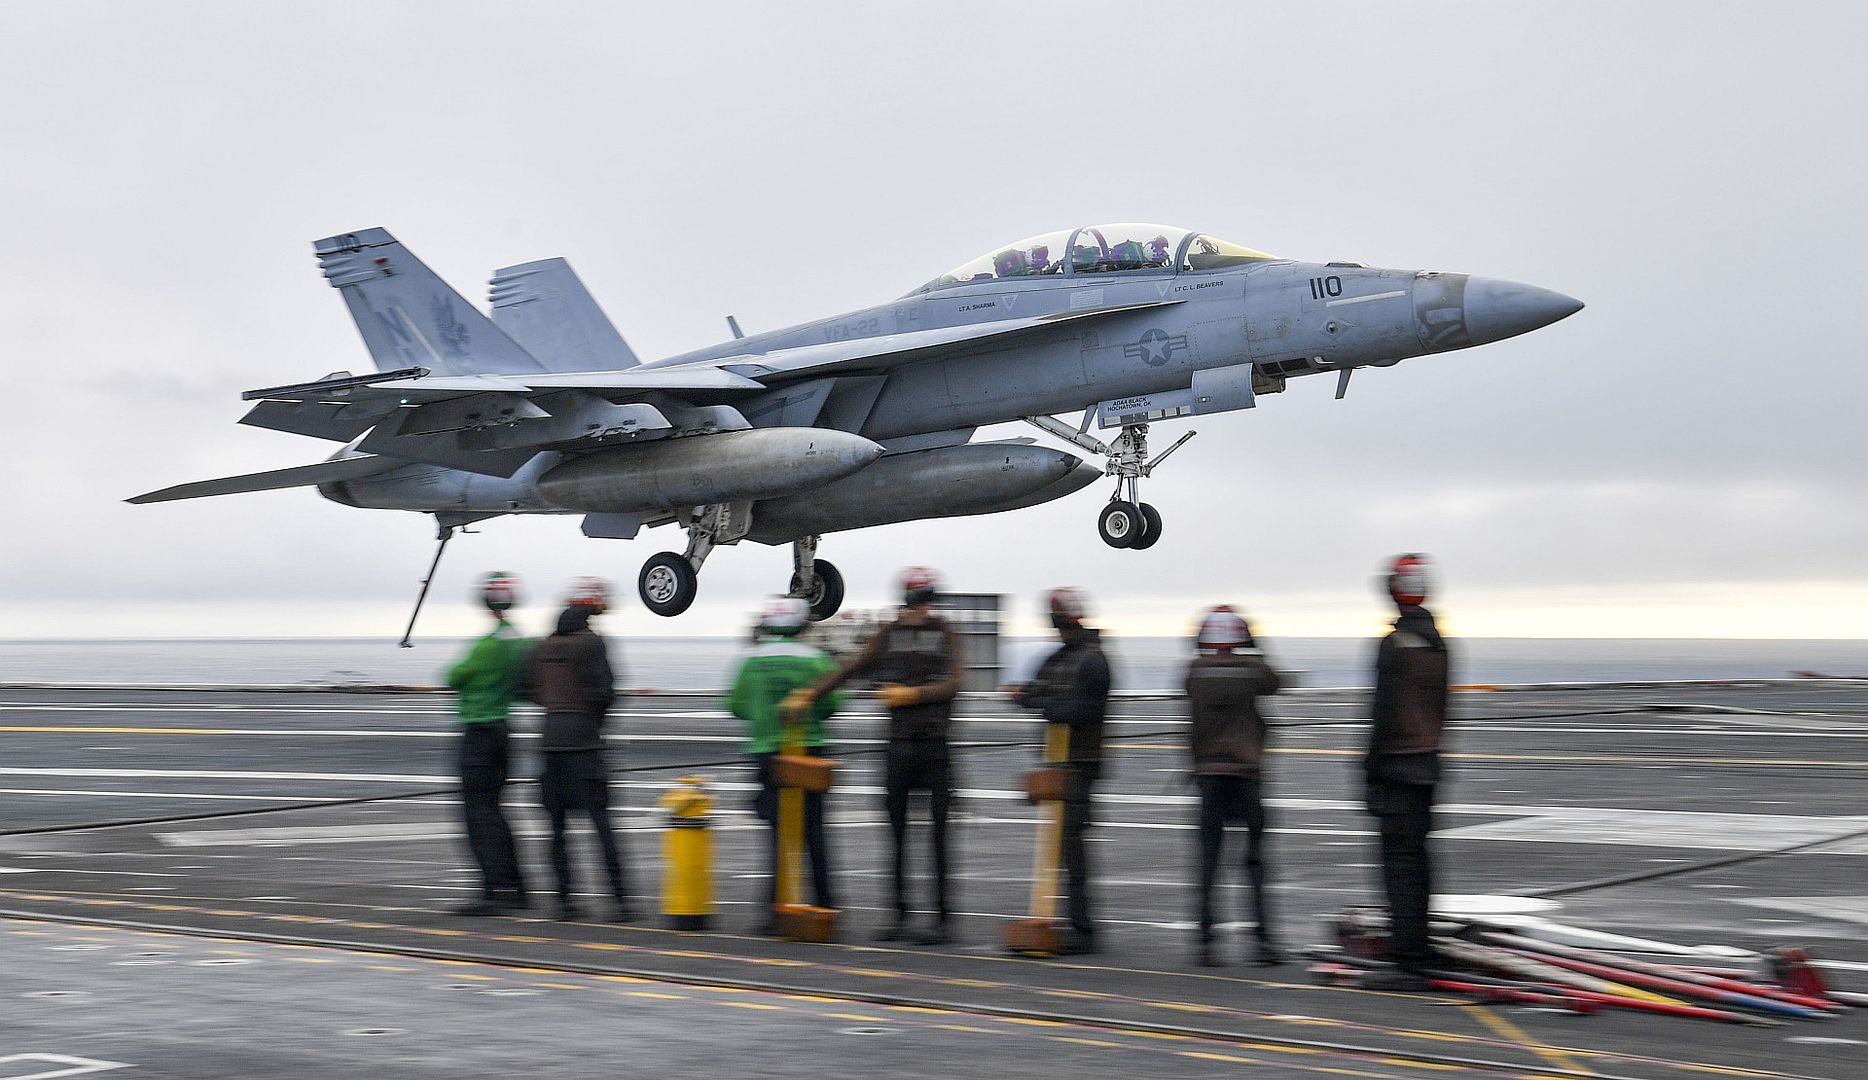 18F Super Hornet From The Fighting Redcocks Of Strike Fighter Squadron 22 Makes An Arrested Gear Landing Aboard The Aircraft Carrier USS Nimitz